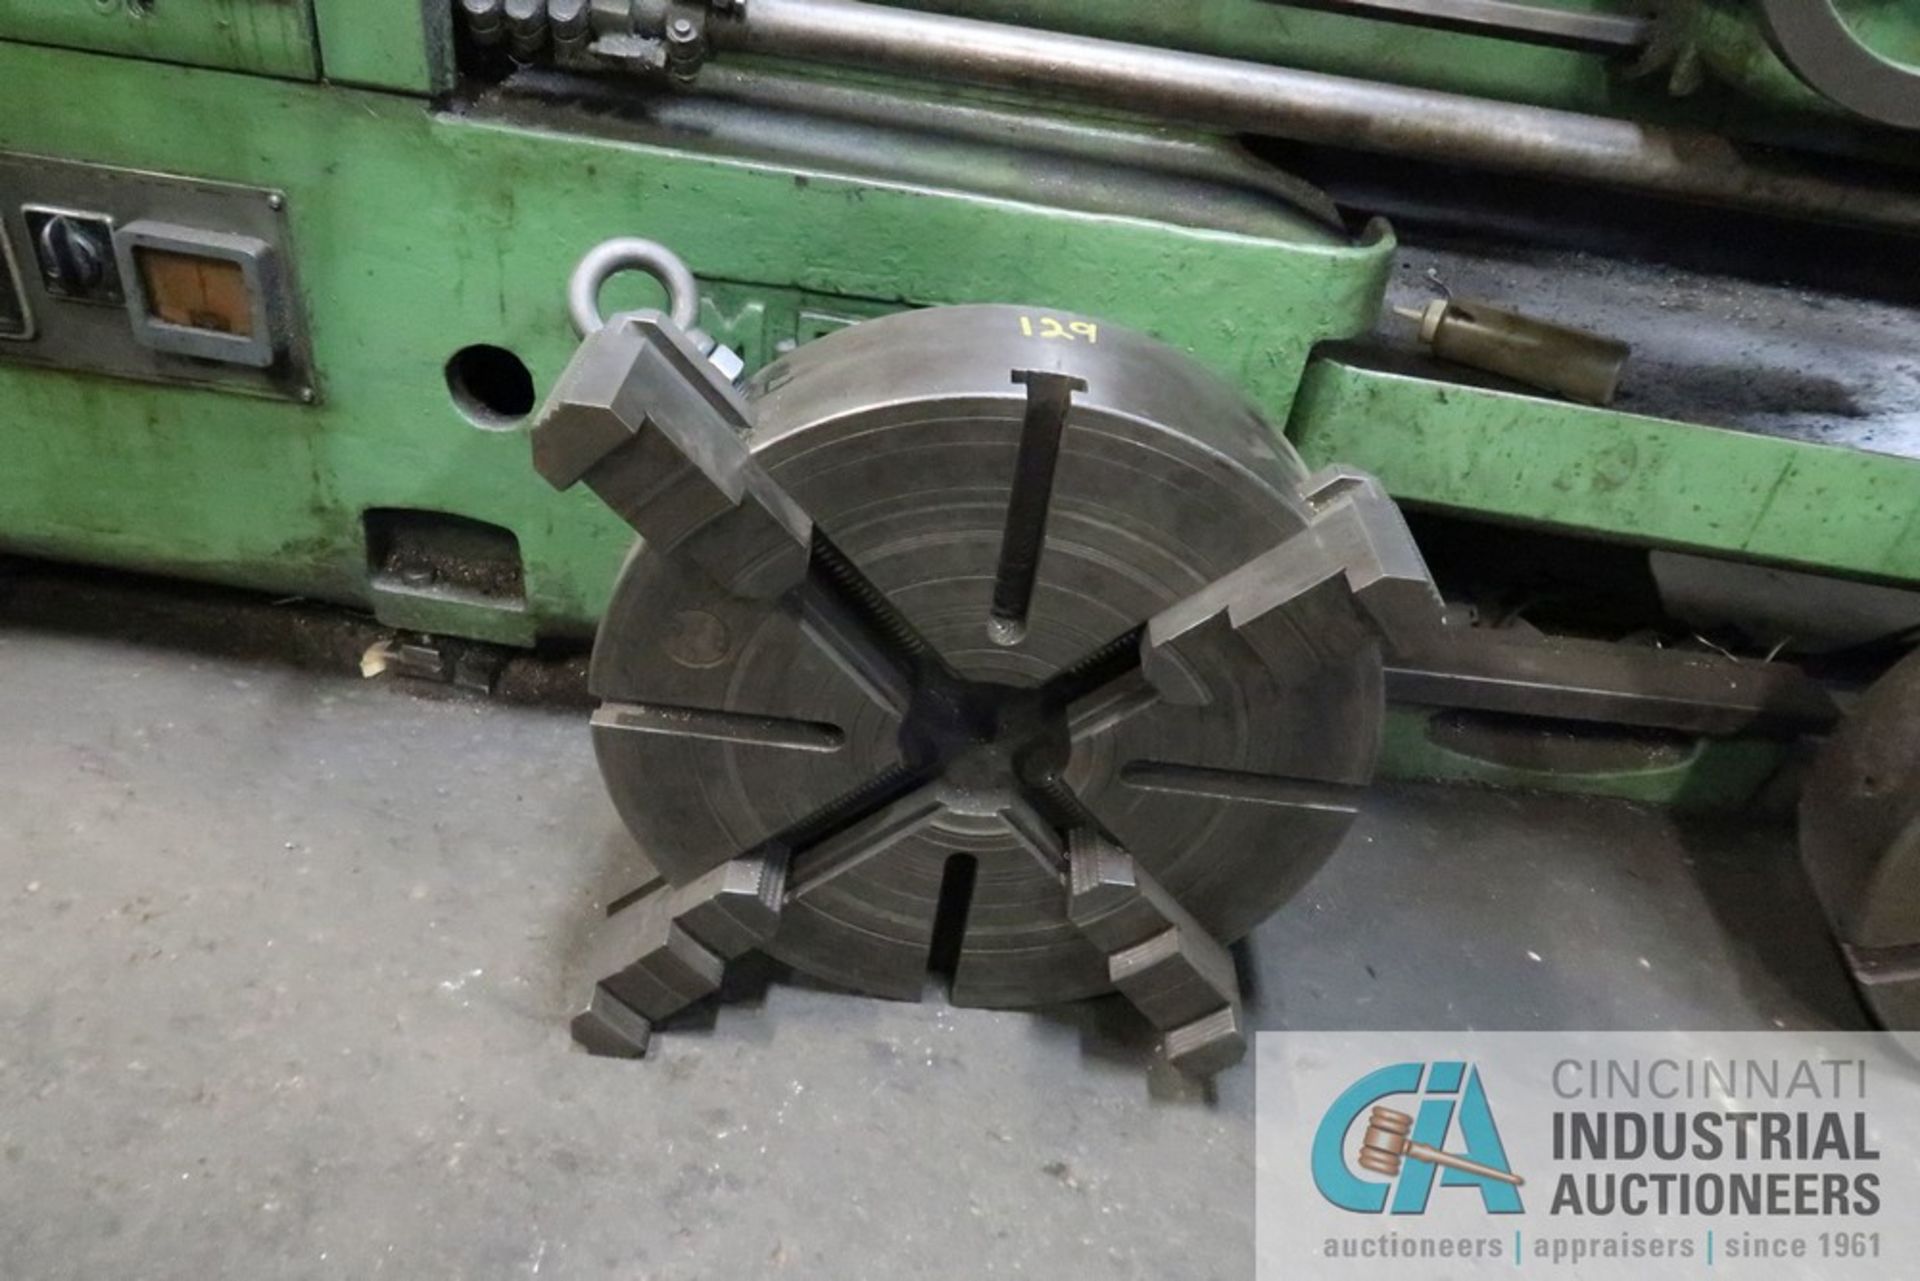 24" / 35" X 96" CLOVER GAP BED LATHE, 2-1/2" SPINDLE HOLE, 33-1/2" FACE PLATE, STEADY REST, WITH - Image 12 of 15